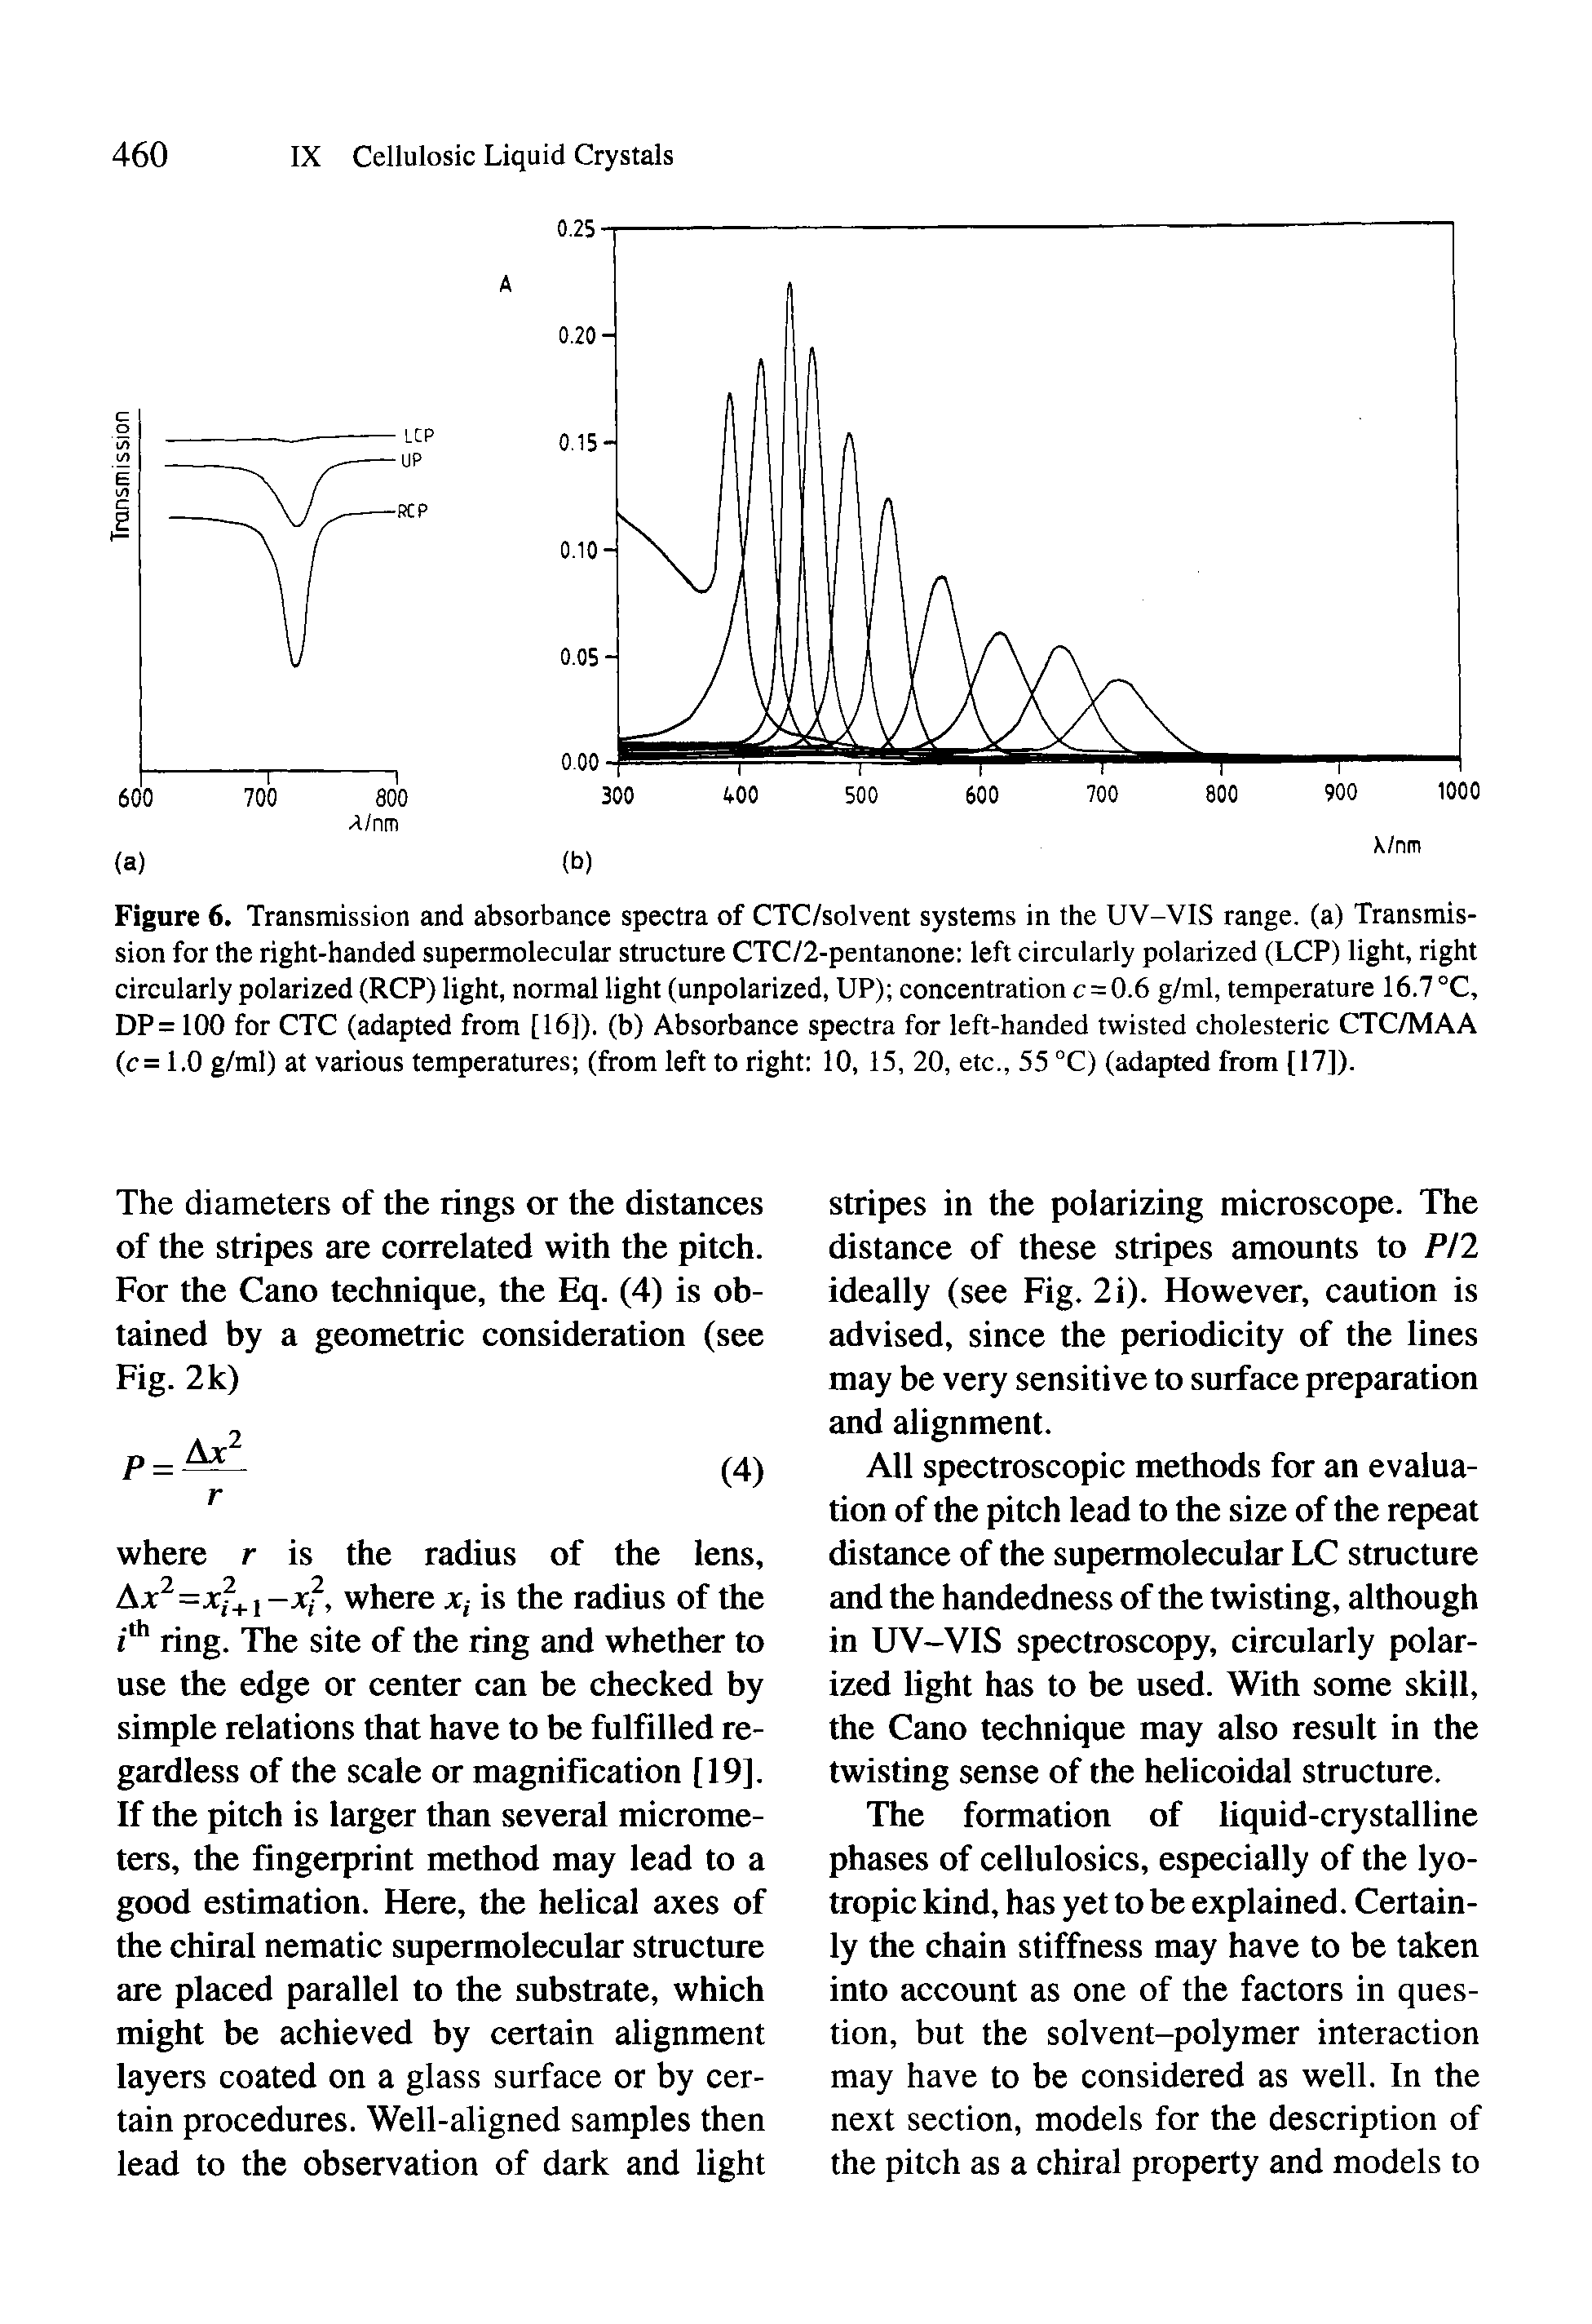 Figure 6. Transmission and absorbance spectra of CTC/solvent systems in the UV-VIS range, (a) Transmission for the right-handed supermolecular structure CTC/2-pentanone left circularly polarized (LCP) light, right circularly polarized (RCP) light, normal light (unpolarized, UP) concentration c=0.6 g/ml, temperature 16.7 °C, DP = 100 for CTC (adapted from [16]). (b) Absorbance spectra for left-handed twisted cholesteric CTC/MAA (c= 1.0 g/ml) at various temperatures (from left to right 10, 15, 20, etc., 55 °C) (adapted from [17]).